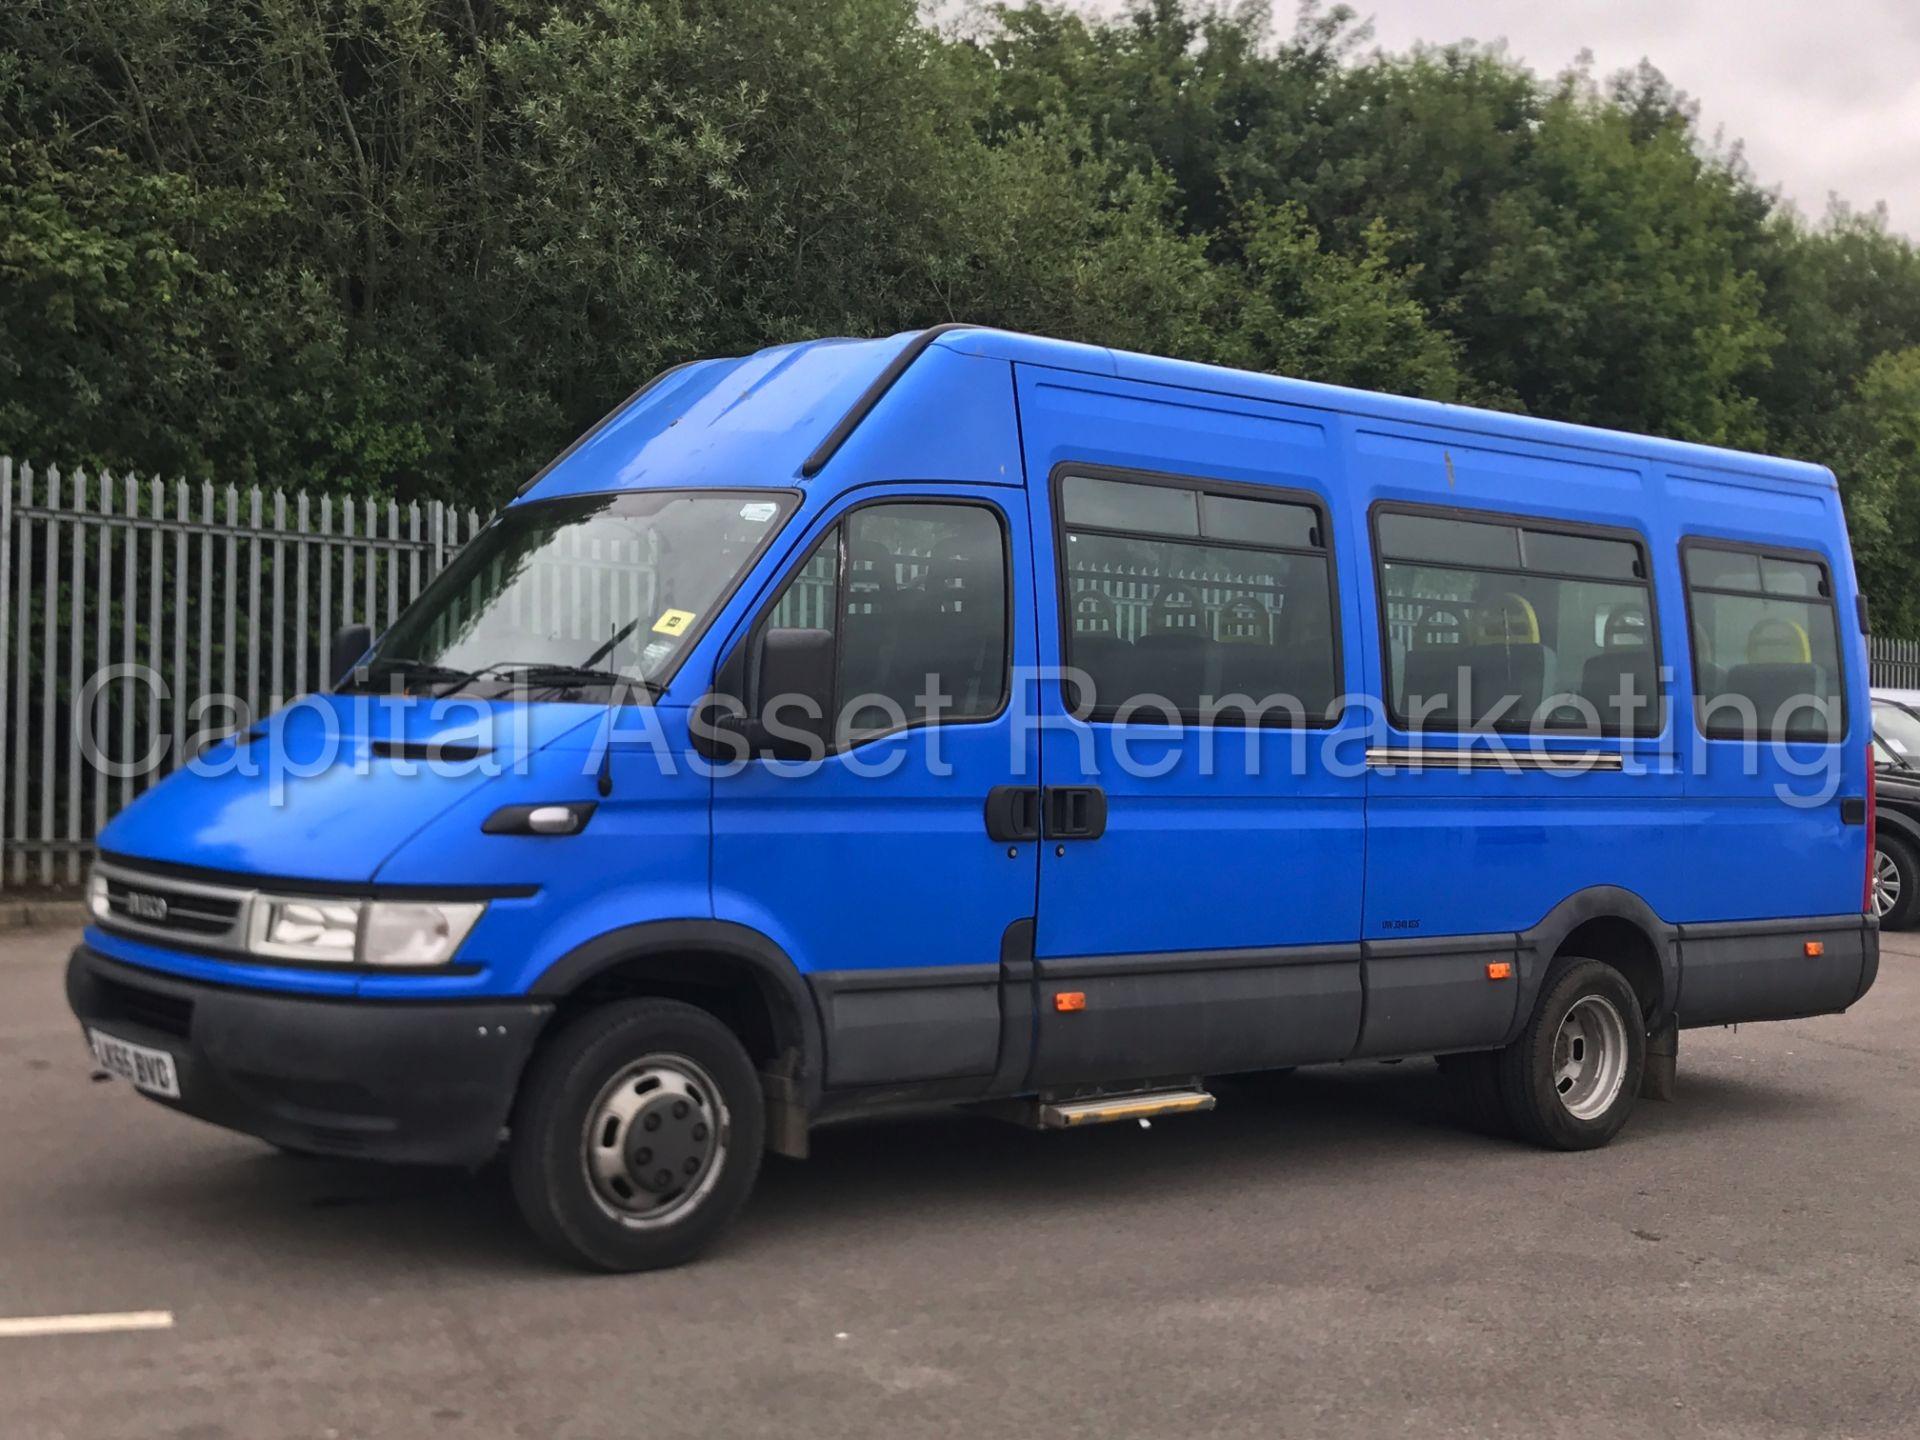 IVECO DAILY 40C14 '17 SEATER COACH / BUS' (2006 MODEL) '3.0 DIESEL - 6 SPEED' *IRIS BUS* (1 OWNER) - Image 6 of 23